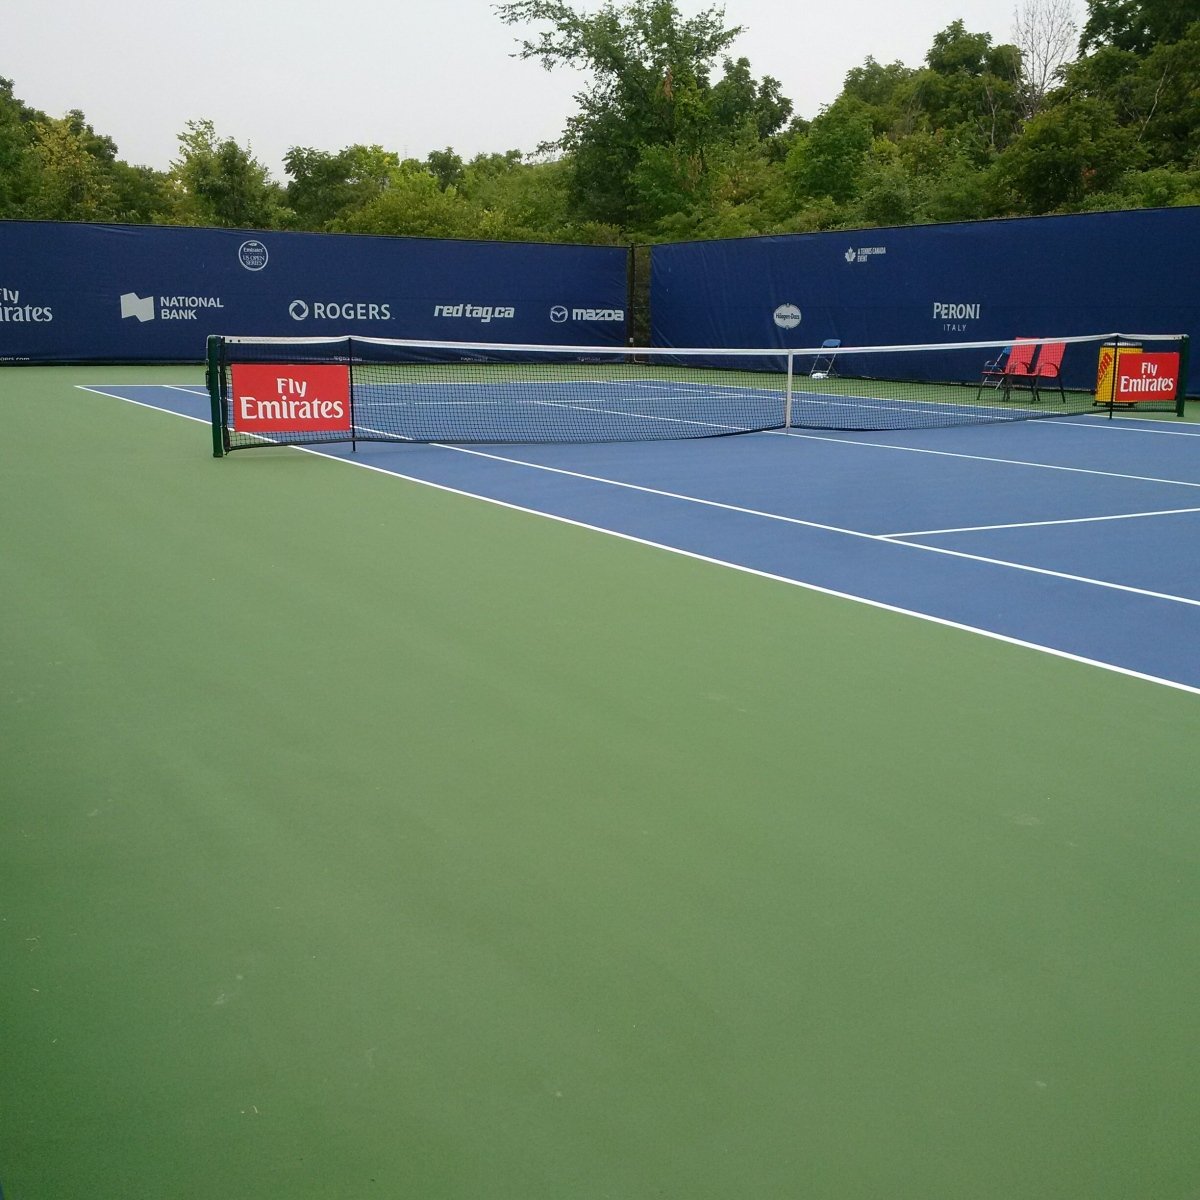 Rogers Cup On Twitter See The 1 Player In The World Practice Right Here Djokernole Will Start His Hit At 1 3 15 On Court 2 Rogerscup